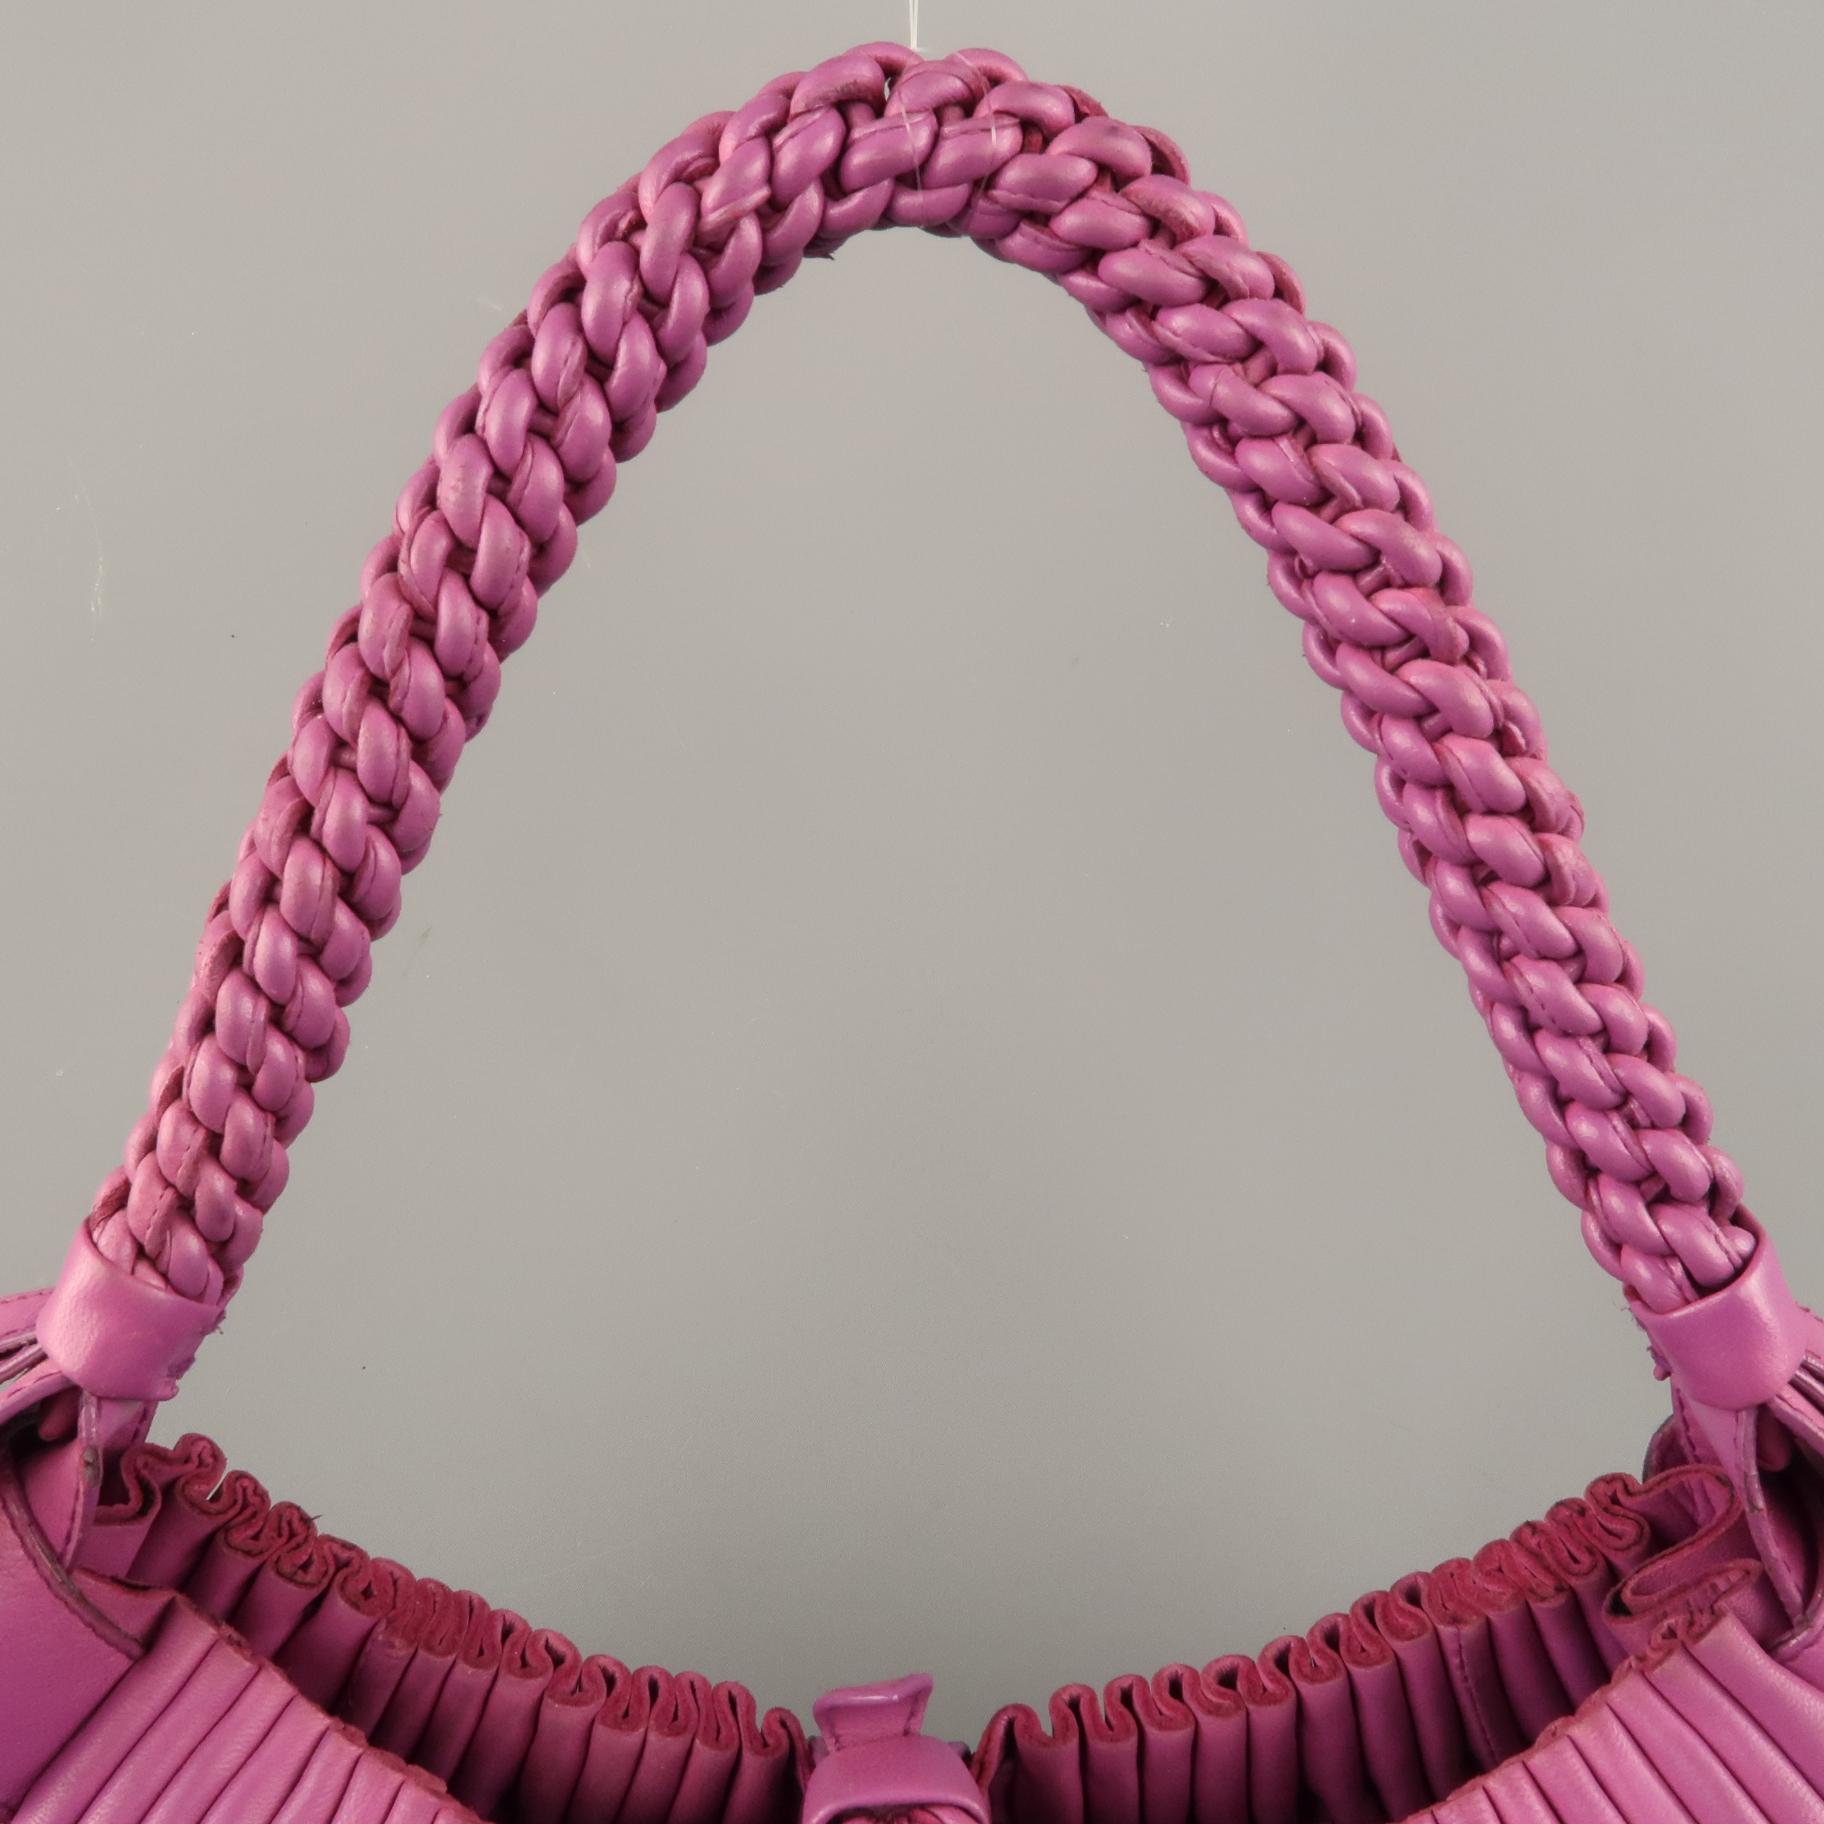 Vintage BOTTEGA VENETA shoulder bag comes in purple leather with a gathered base. braided woven handle, and snap tab closure with flower appliques. Wear throughout. As-is. Made in Italy.
 
Good Pre-Owned Condition.
 
Measurements:
 
Length:13